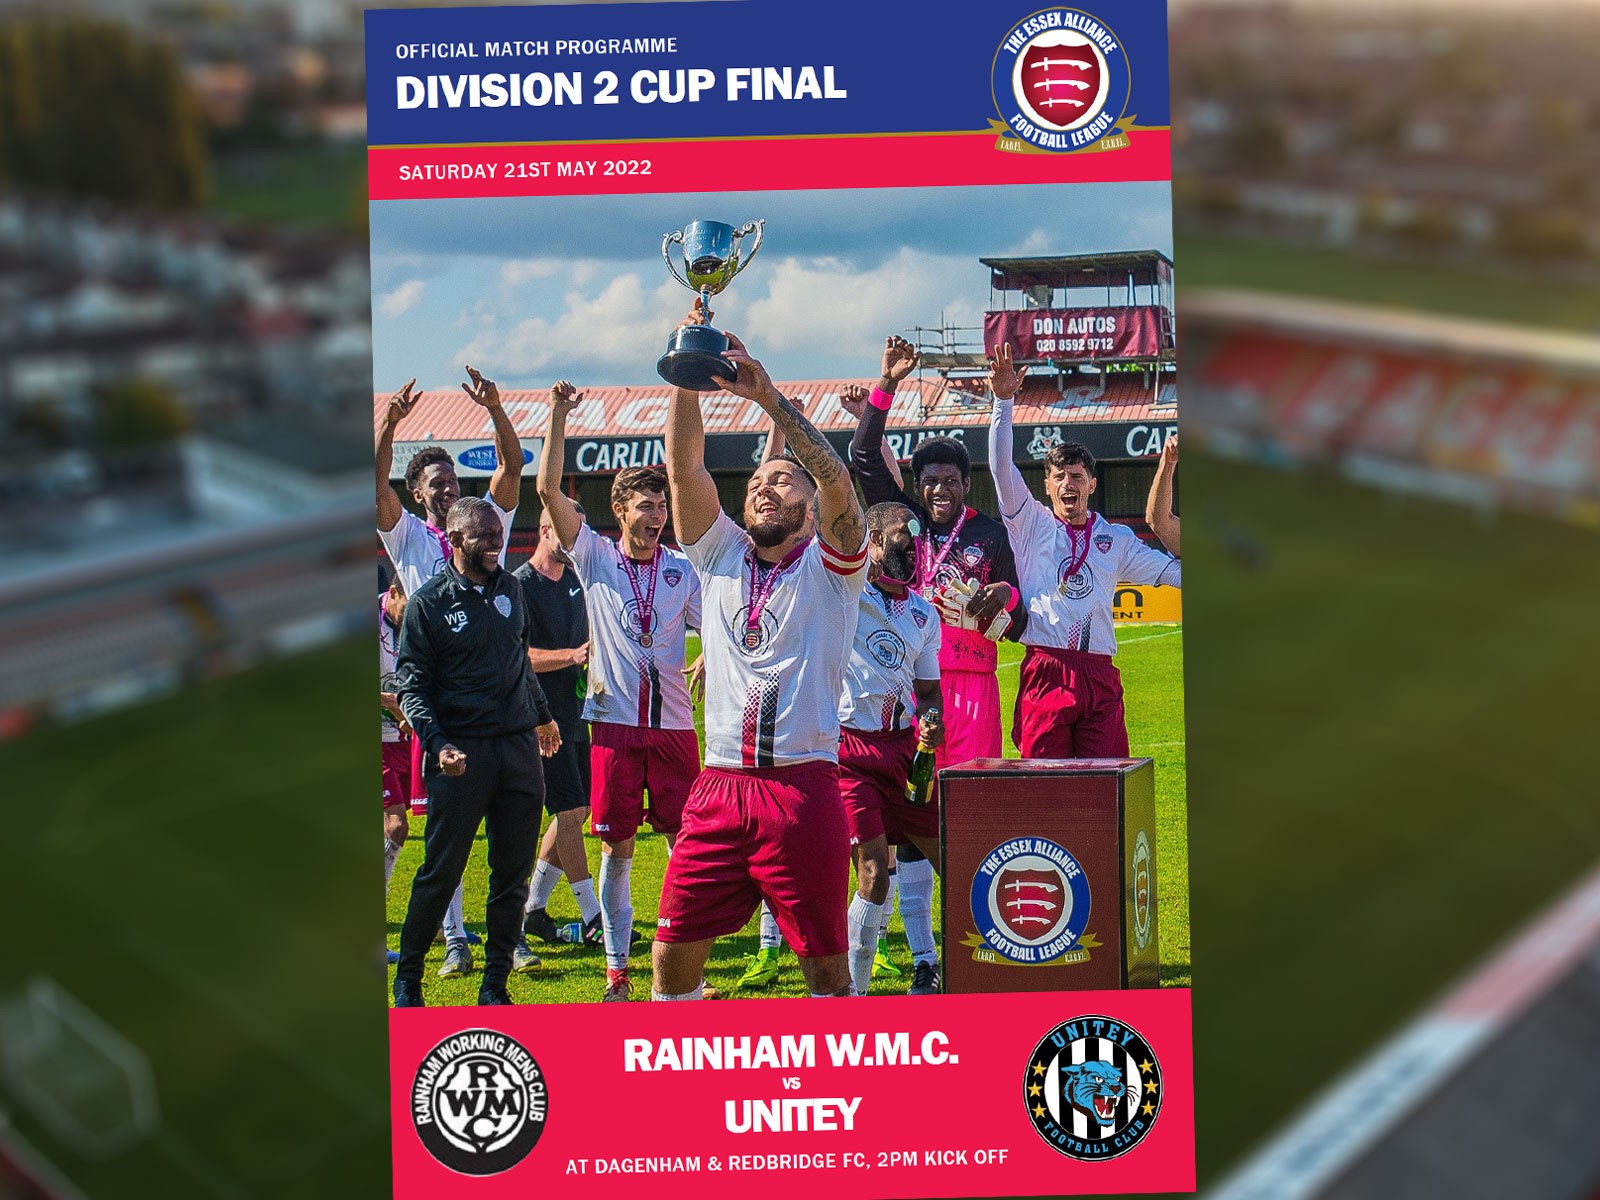 Rainham WMC face Unitey this Saturday to battle for the Division Two Cup